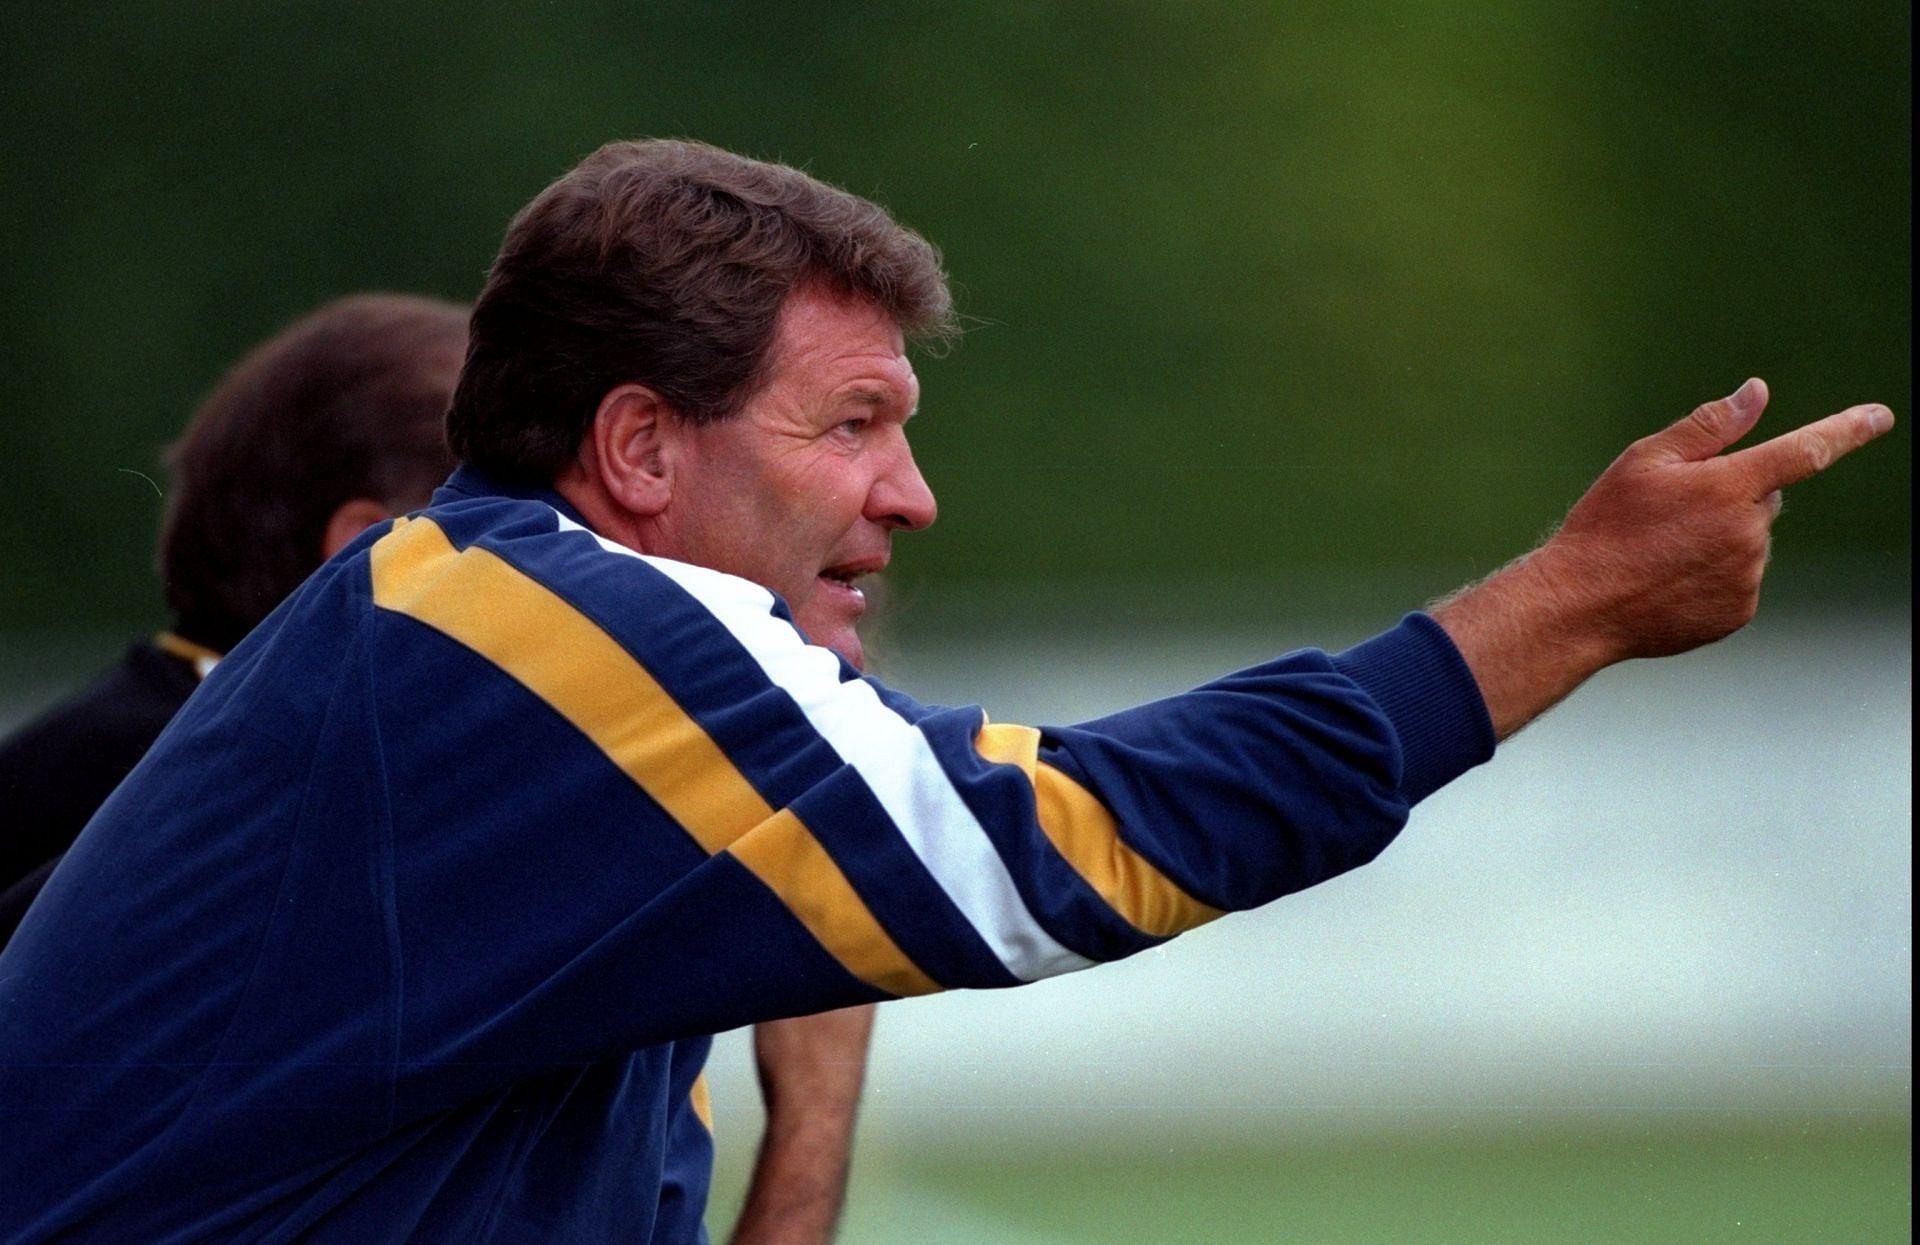 John Toshack shouting instructions to Madrid players during a friendly match in 1999.